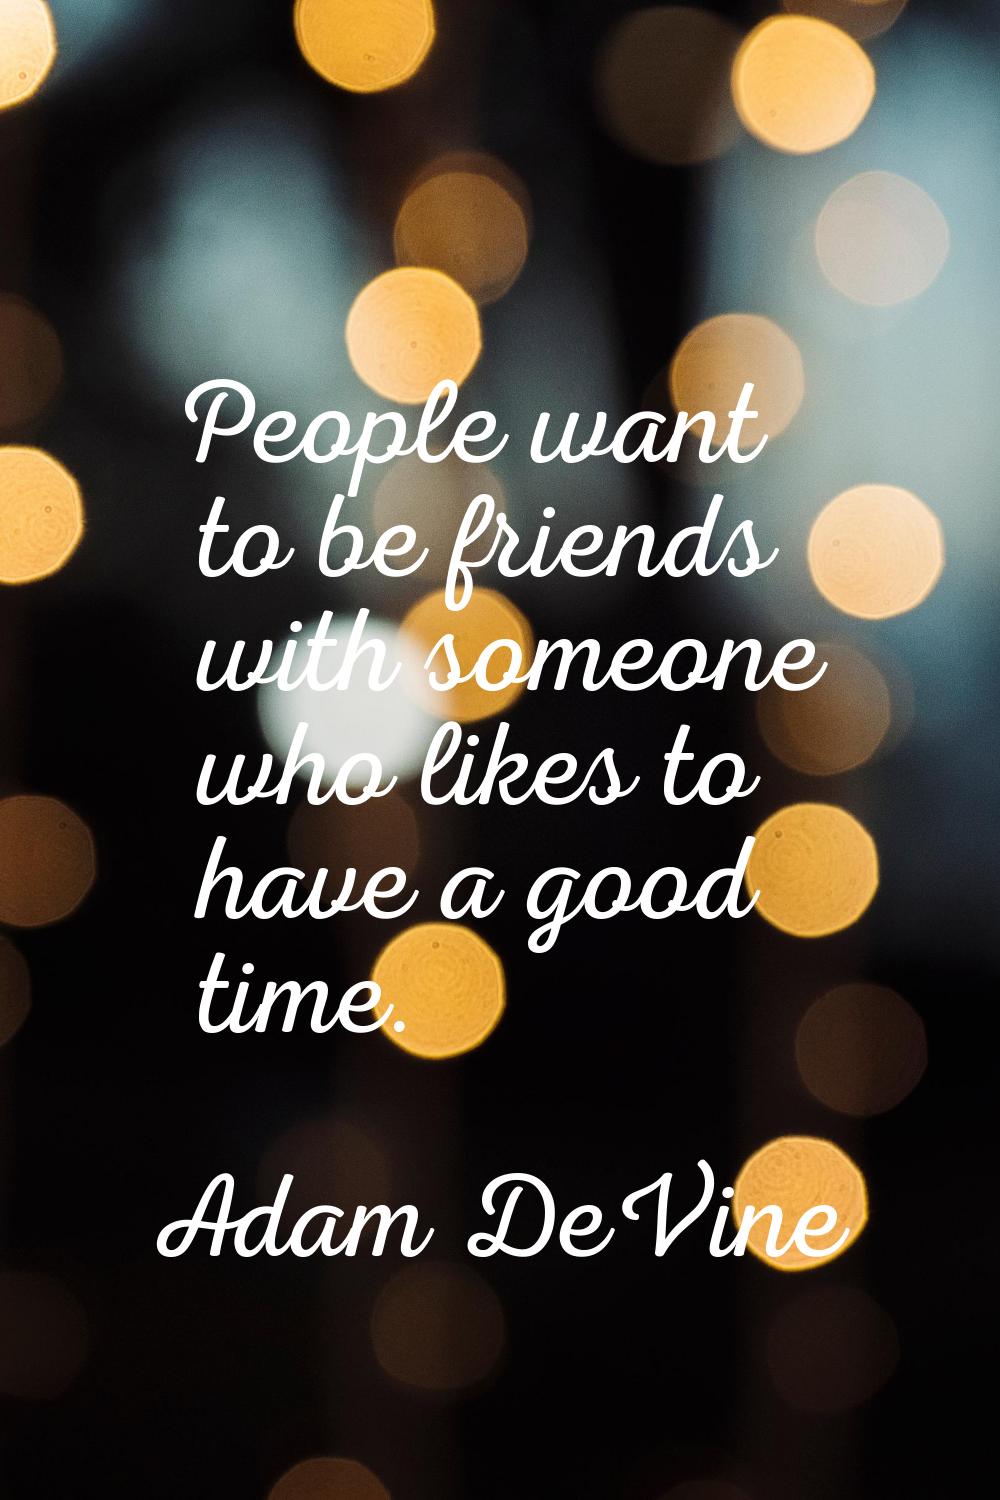 People want to be friends with someone who likes to have a good time.